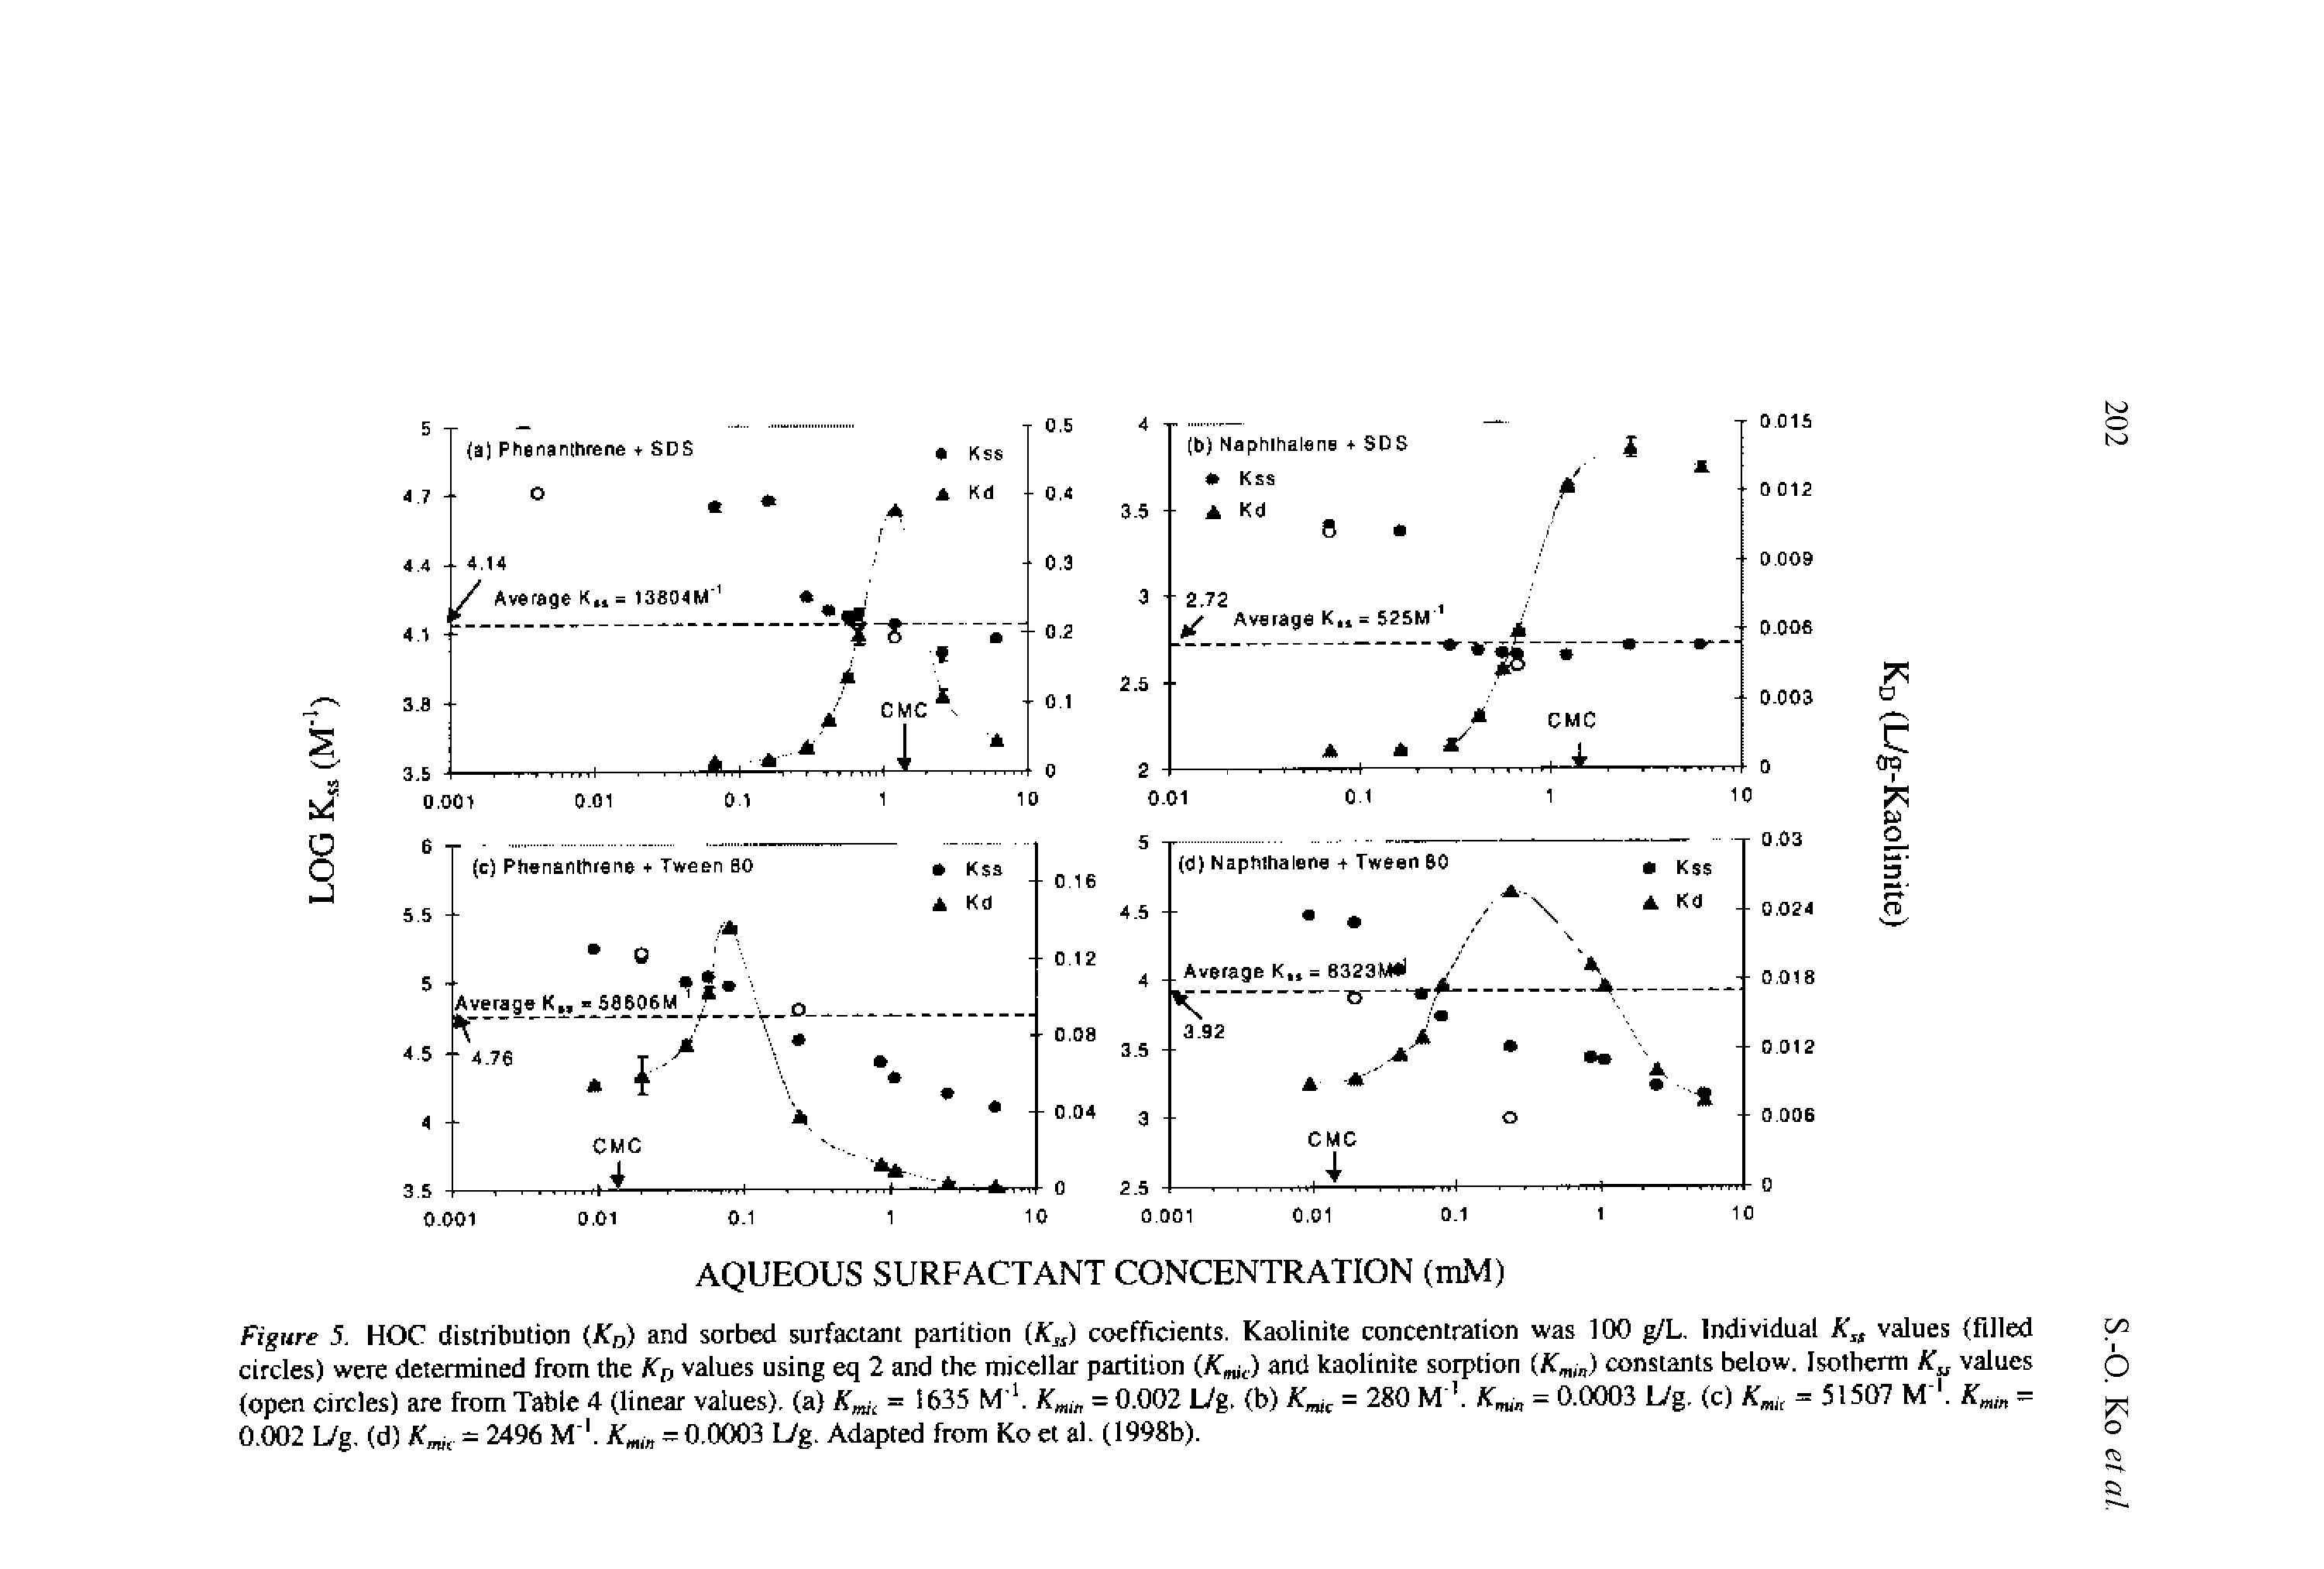 Figure 5. HOC distribution (KD) and sorbed surfactant partition (tf ) coefficients. Kaolinite concentration was 100 g/L, Individual Kss values filled circles) were determined from the KD values using eq 2 and the micellar partition and kaolinite sorption (/fWJT) constants below. Isotherm Ku values open circles) are from Table 4 (linear values), (a) = 1635 M 1. KmitT = 0.002 L/g. (b) = 280 M 1. = 0.0003 L/g. (c) Kmic = 51507 M 1. Kmin -...